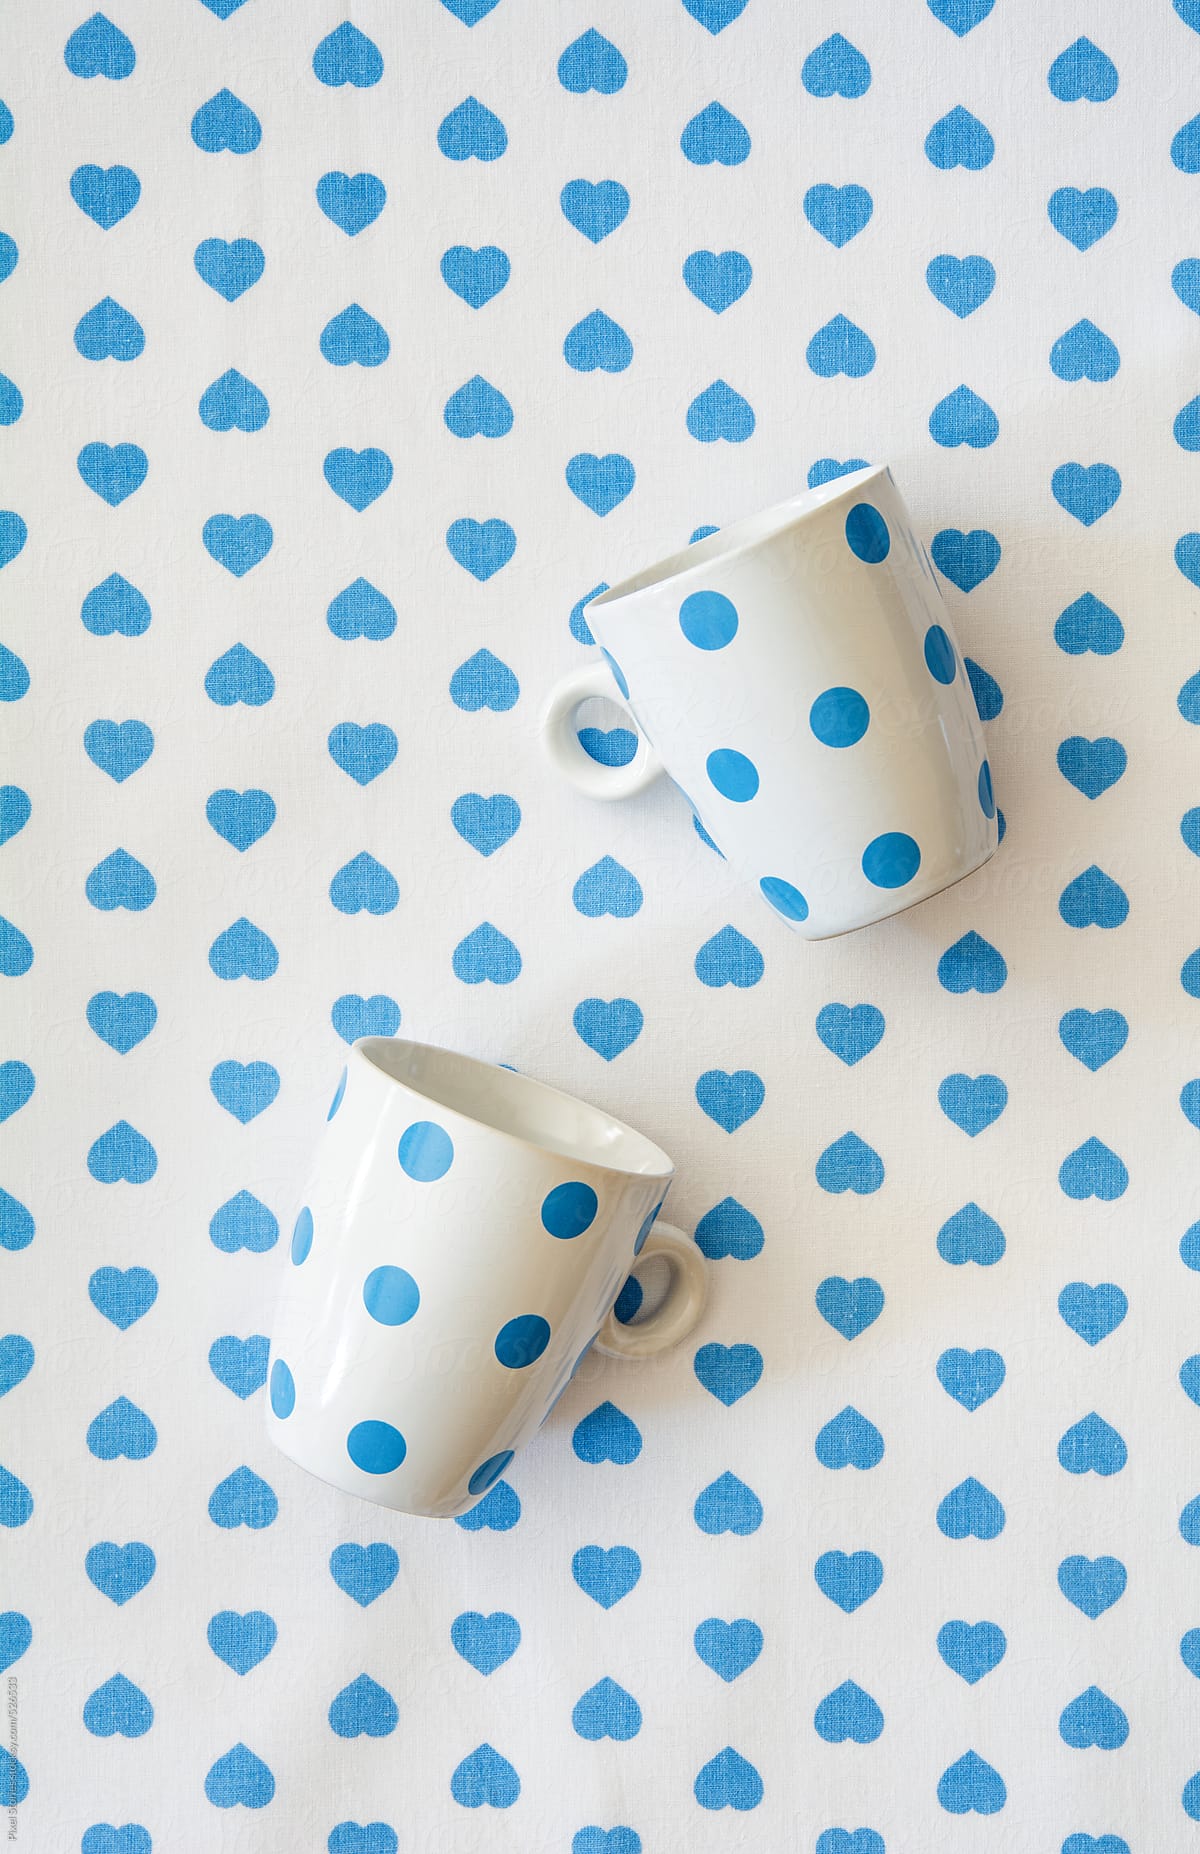 Blue-dotted cups on blue hearts cloth